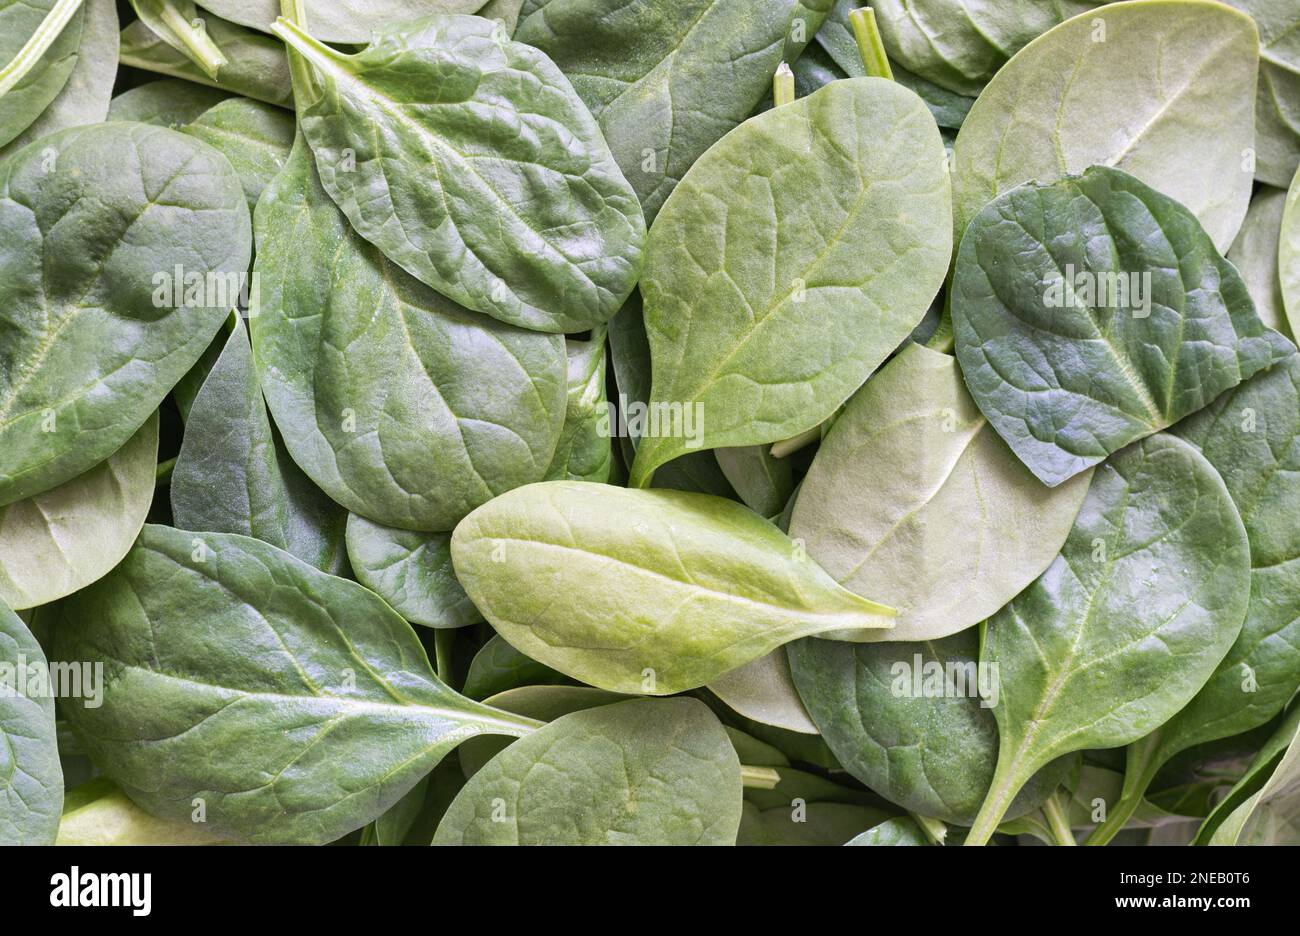 Baby spinach leaves loosely scattered. Raw leafy green vegetables directly above, full frame image. Stock Photo